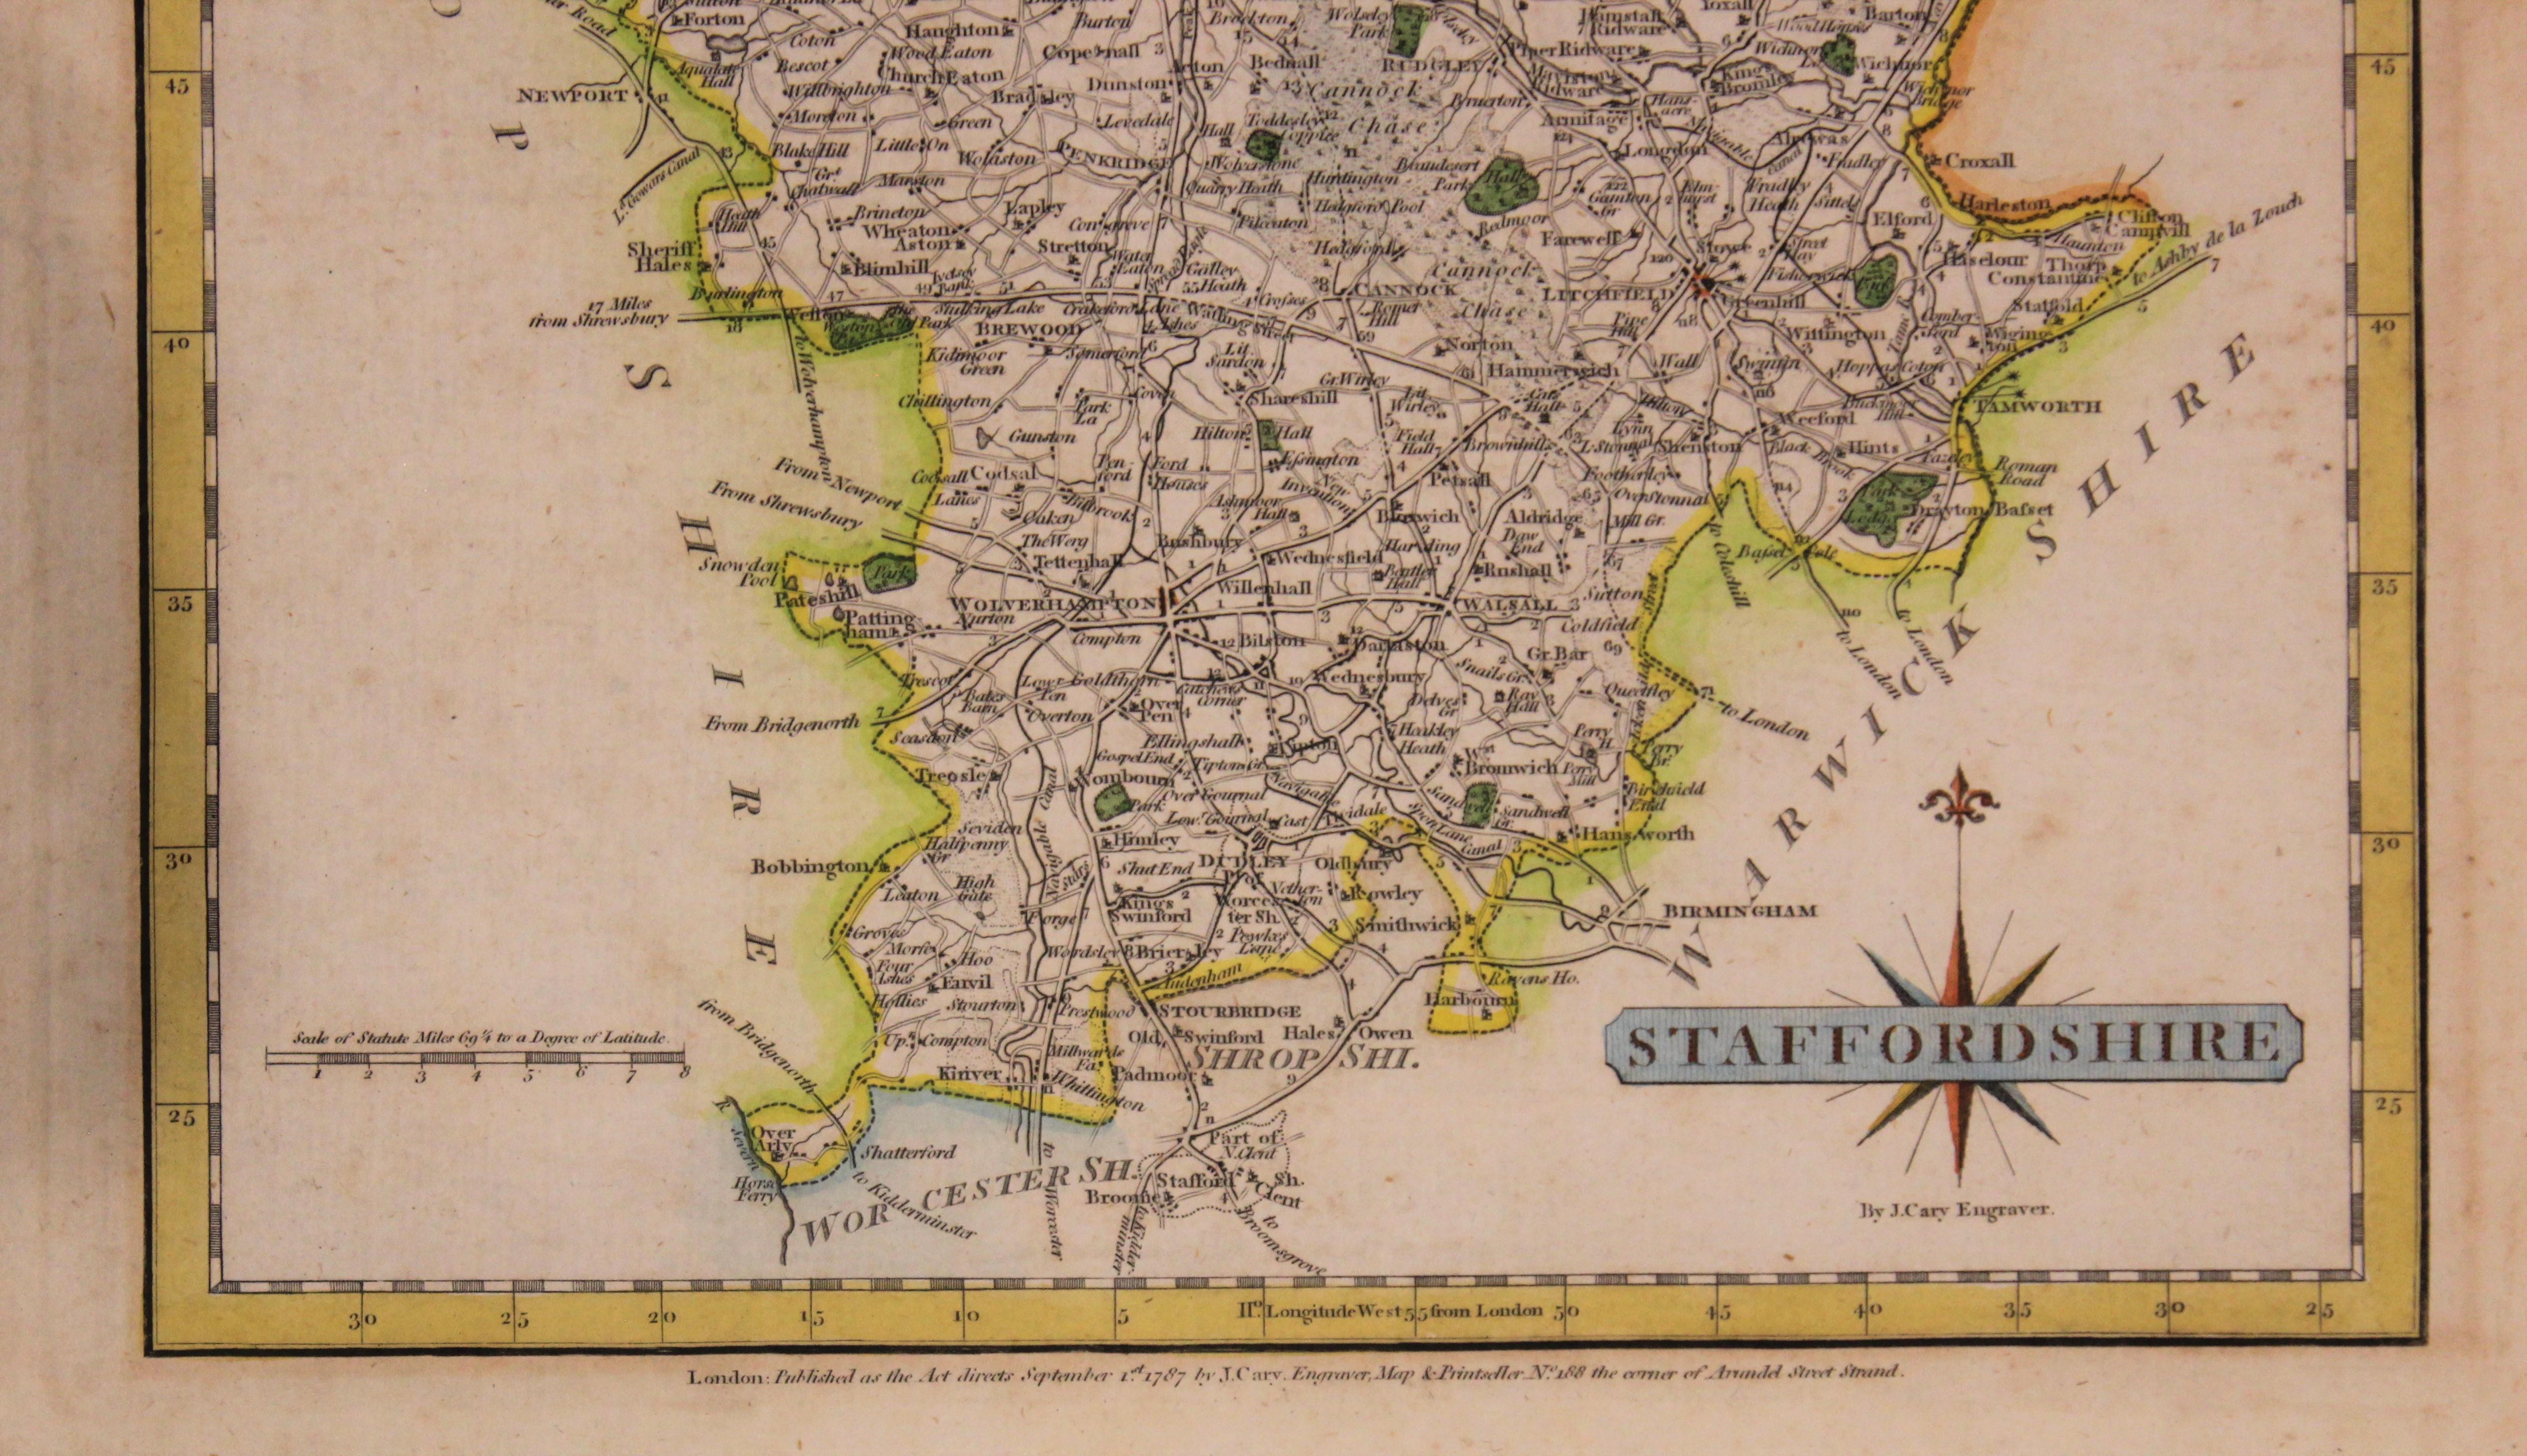 Map engraving from an atlas book published in 1787 titled, 